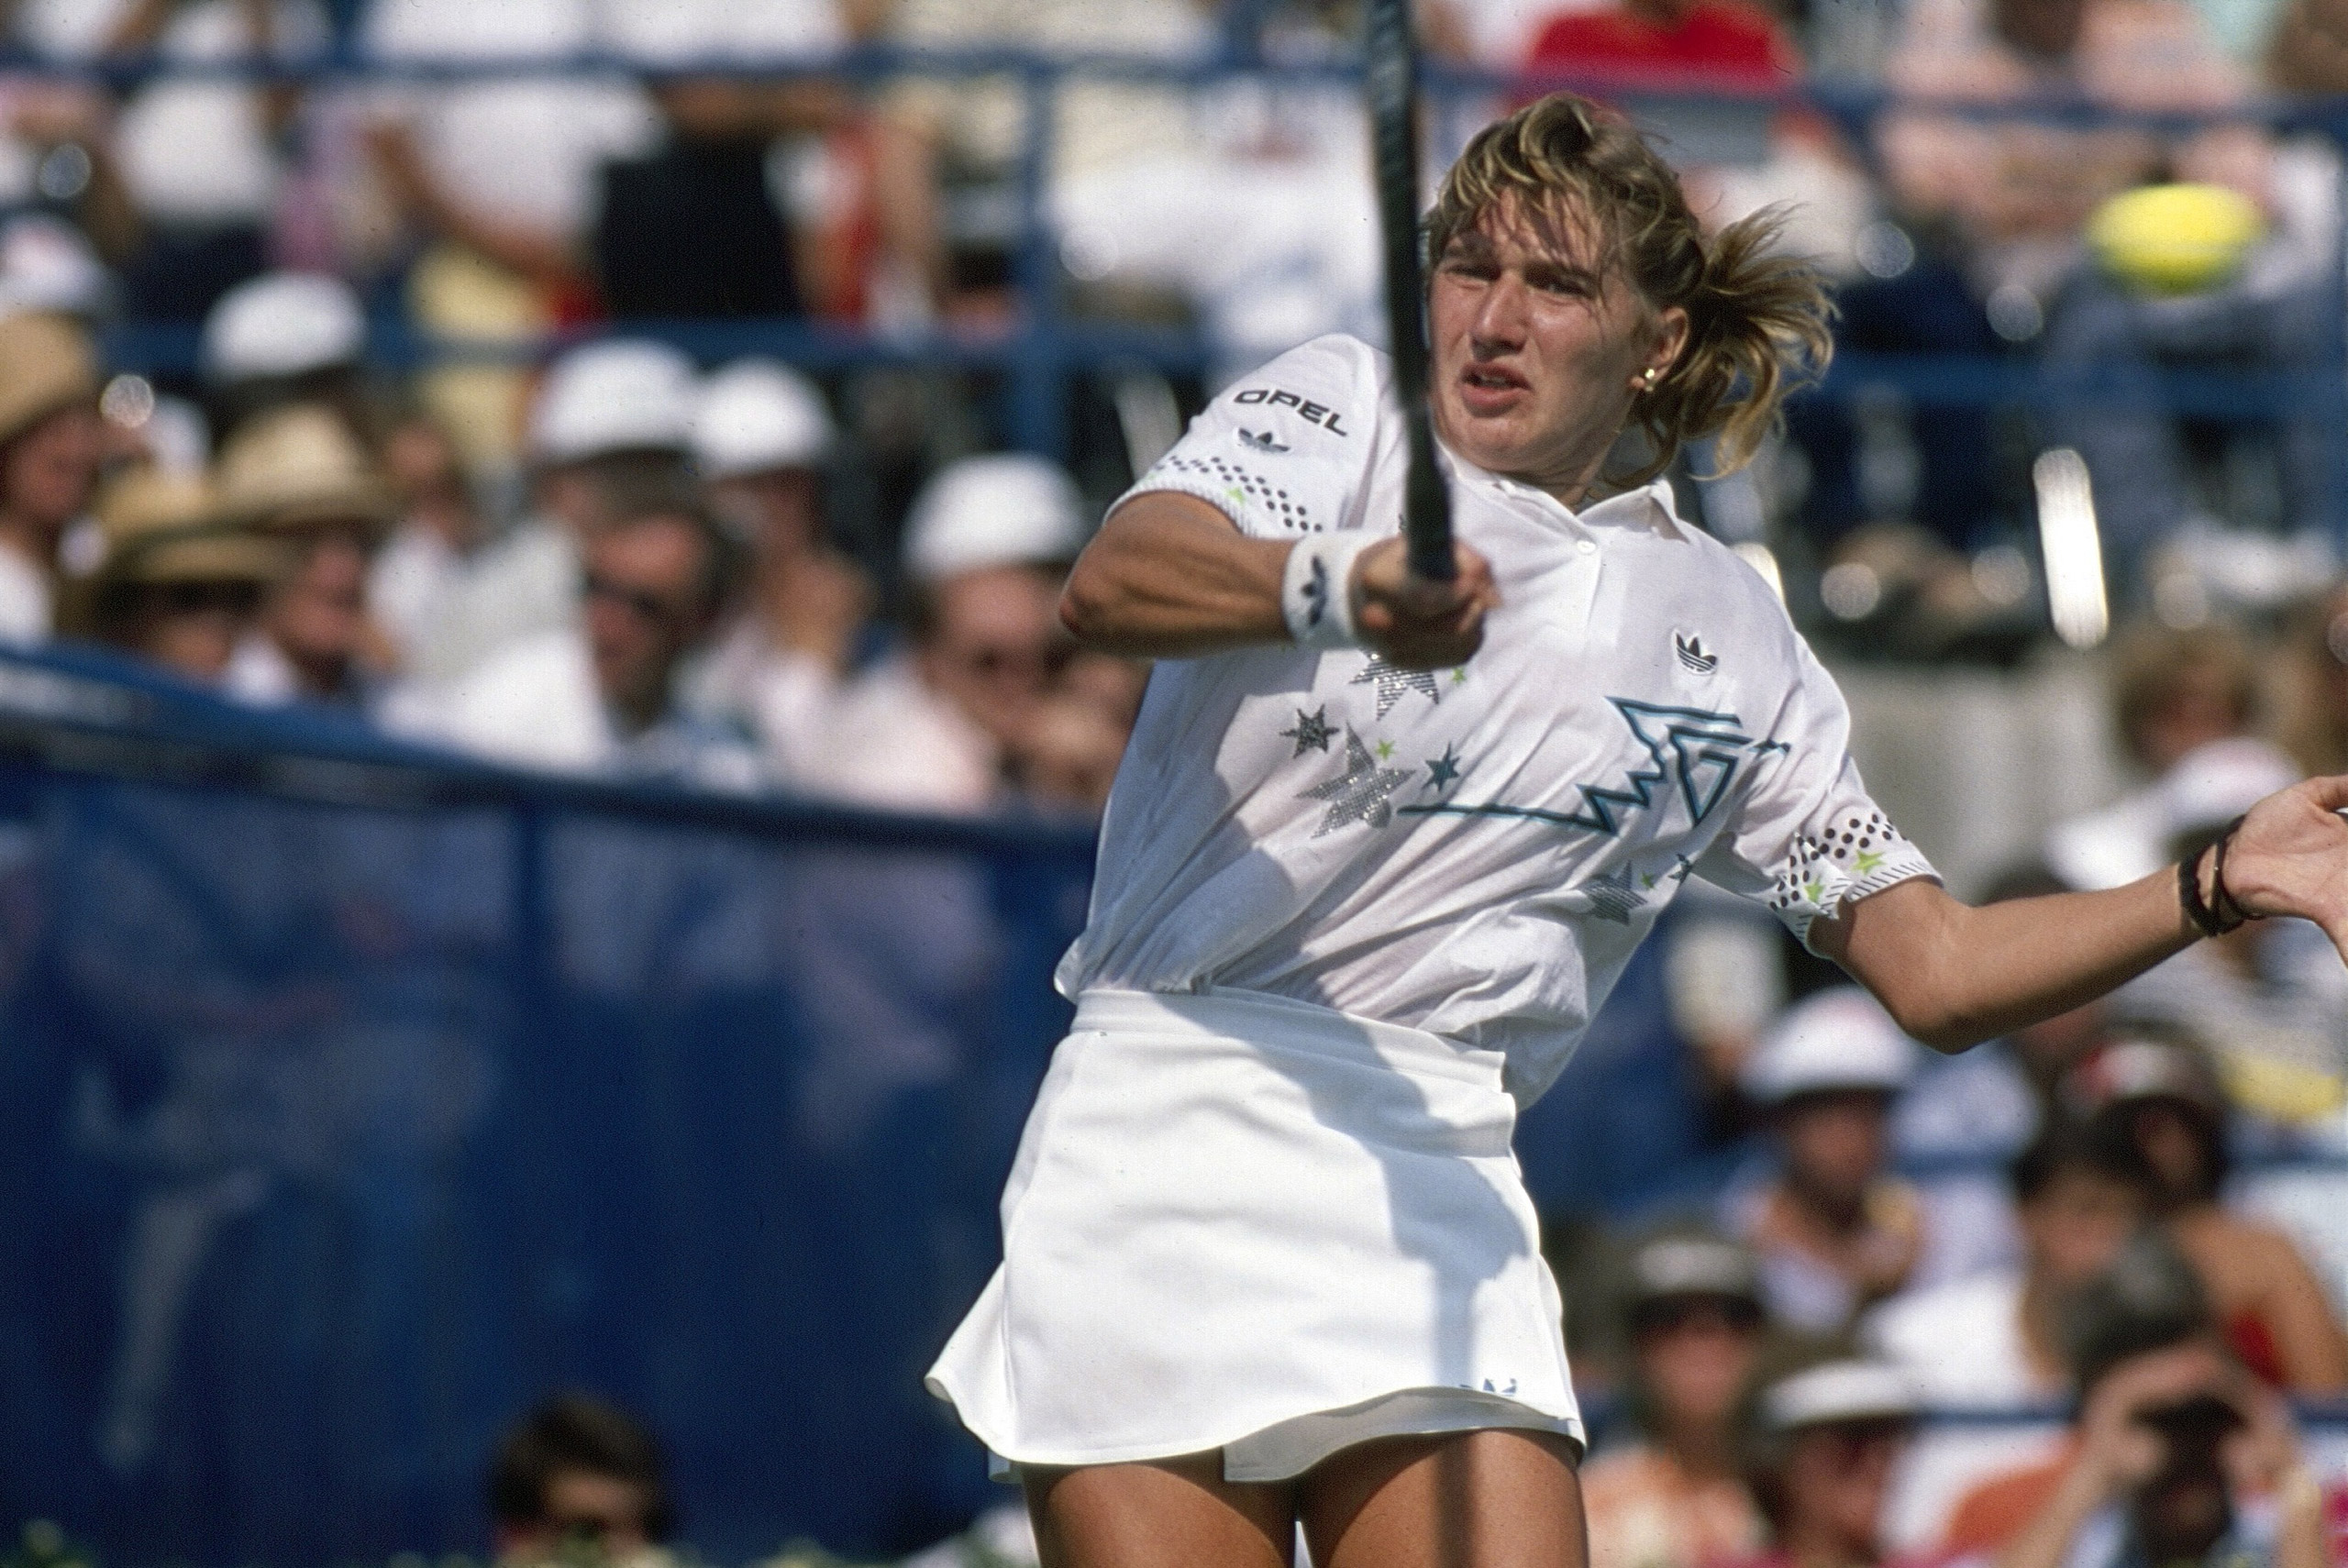 Steffi Graf in action vs Argentina's Gabriela Sabatini during the Women's Final at USTA National Tennis Center in Queens, N.Y., on Sept. 10, 1988.